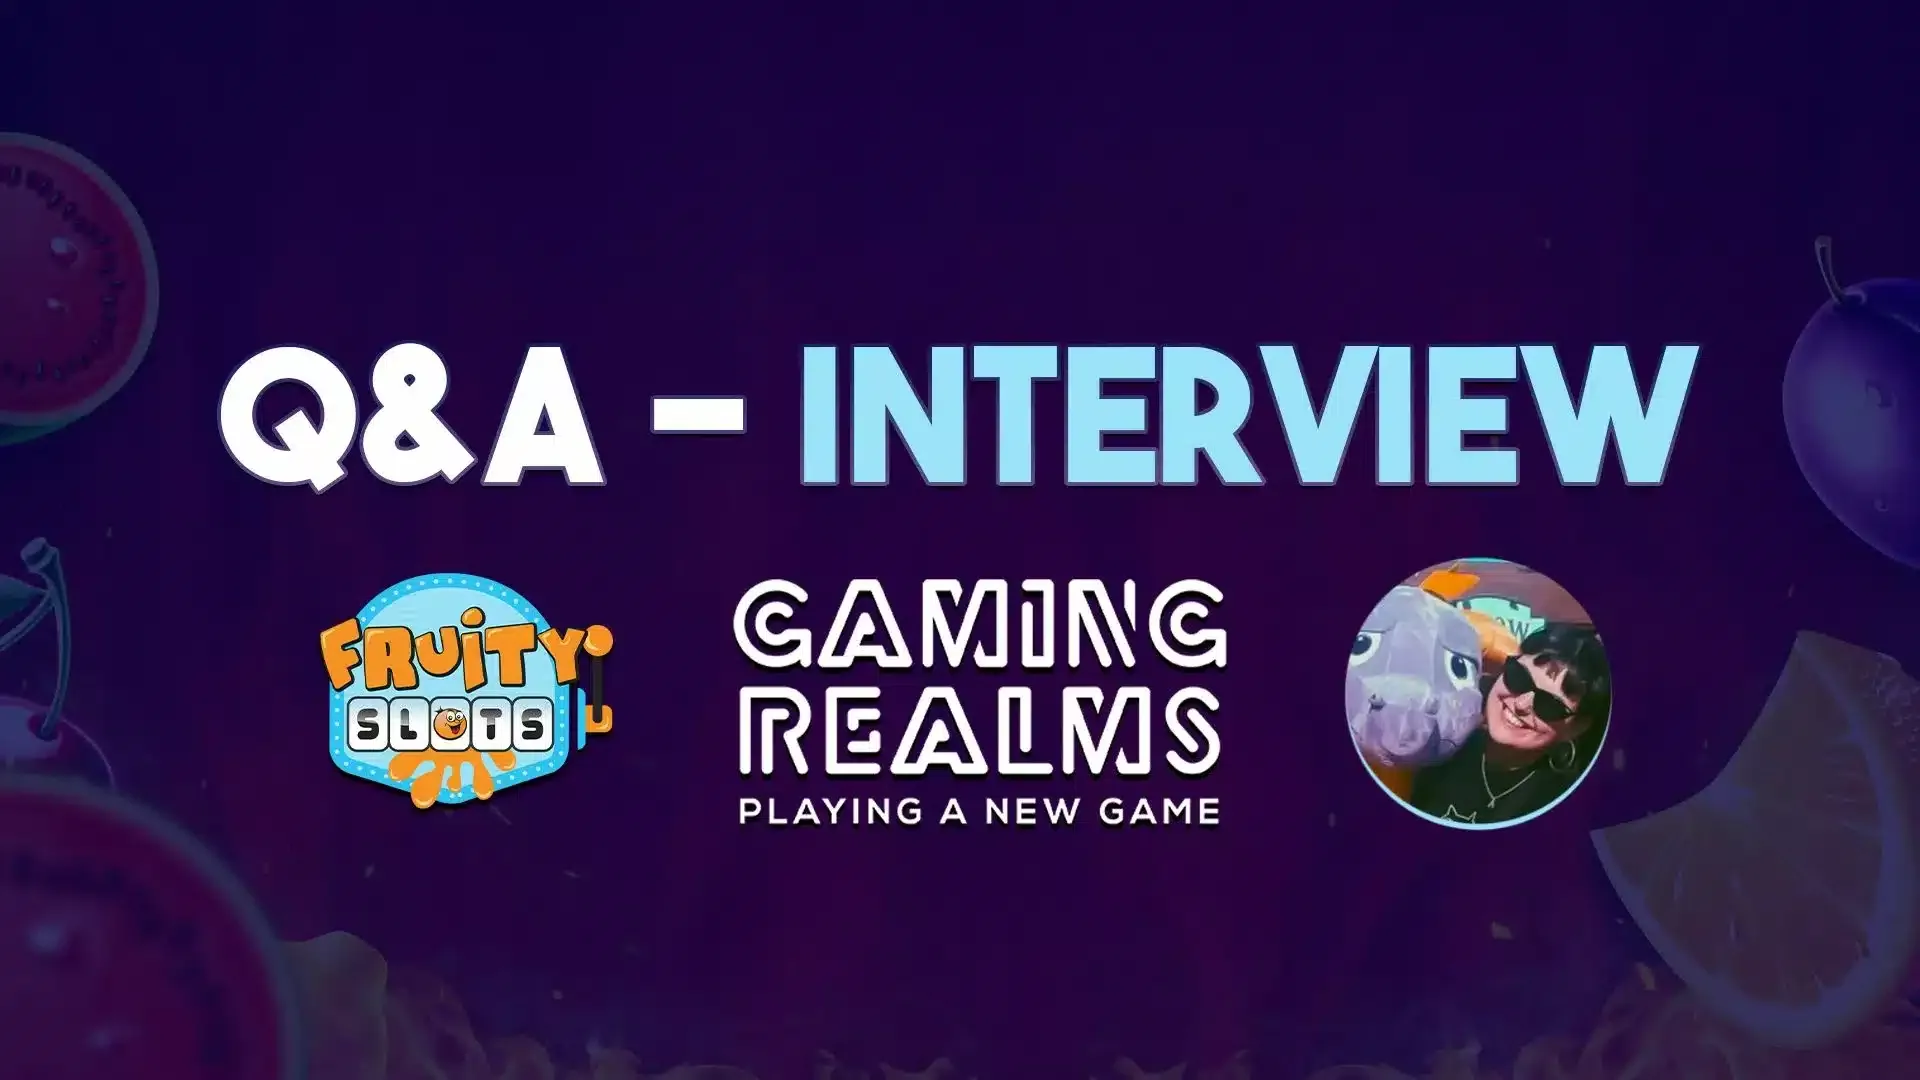 Gaming Realms Q&A